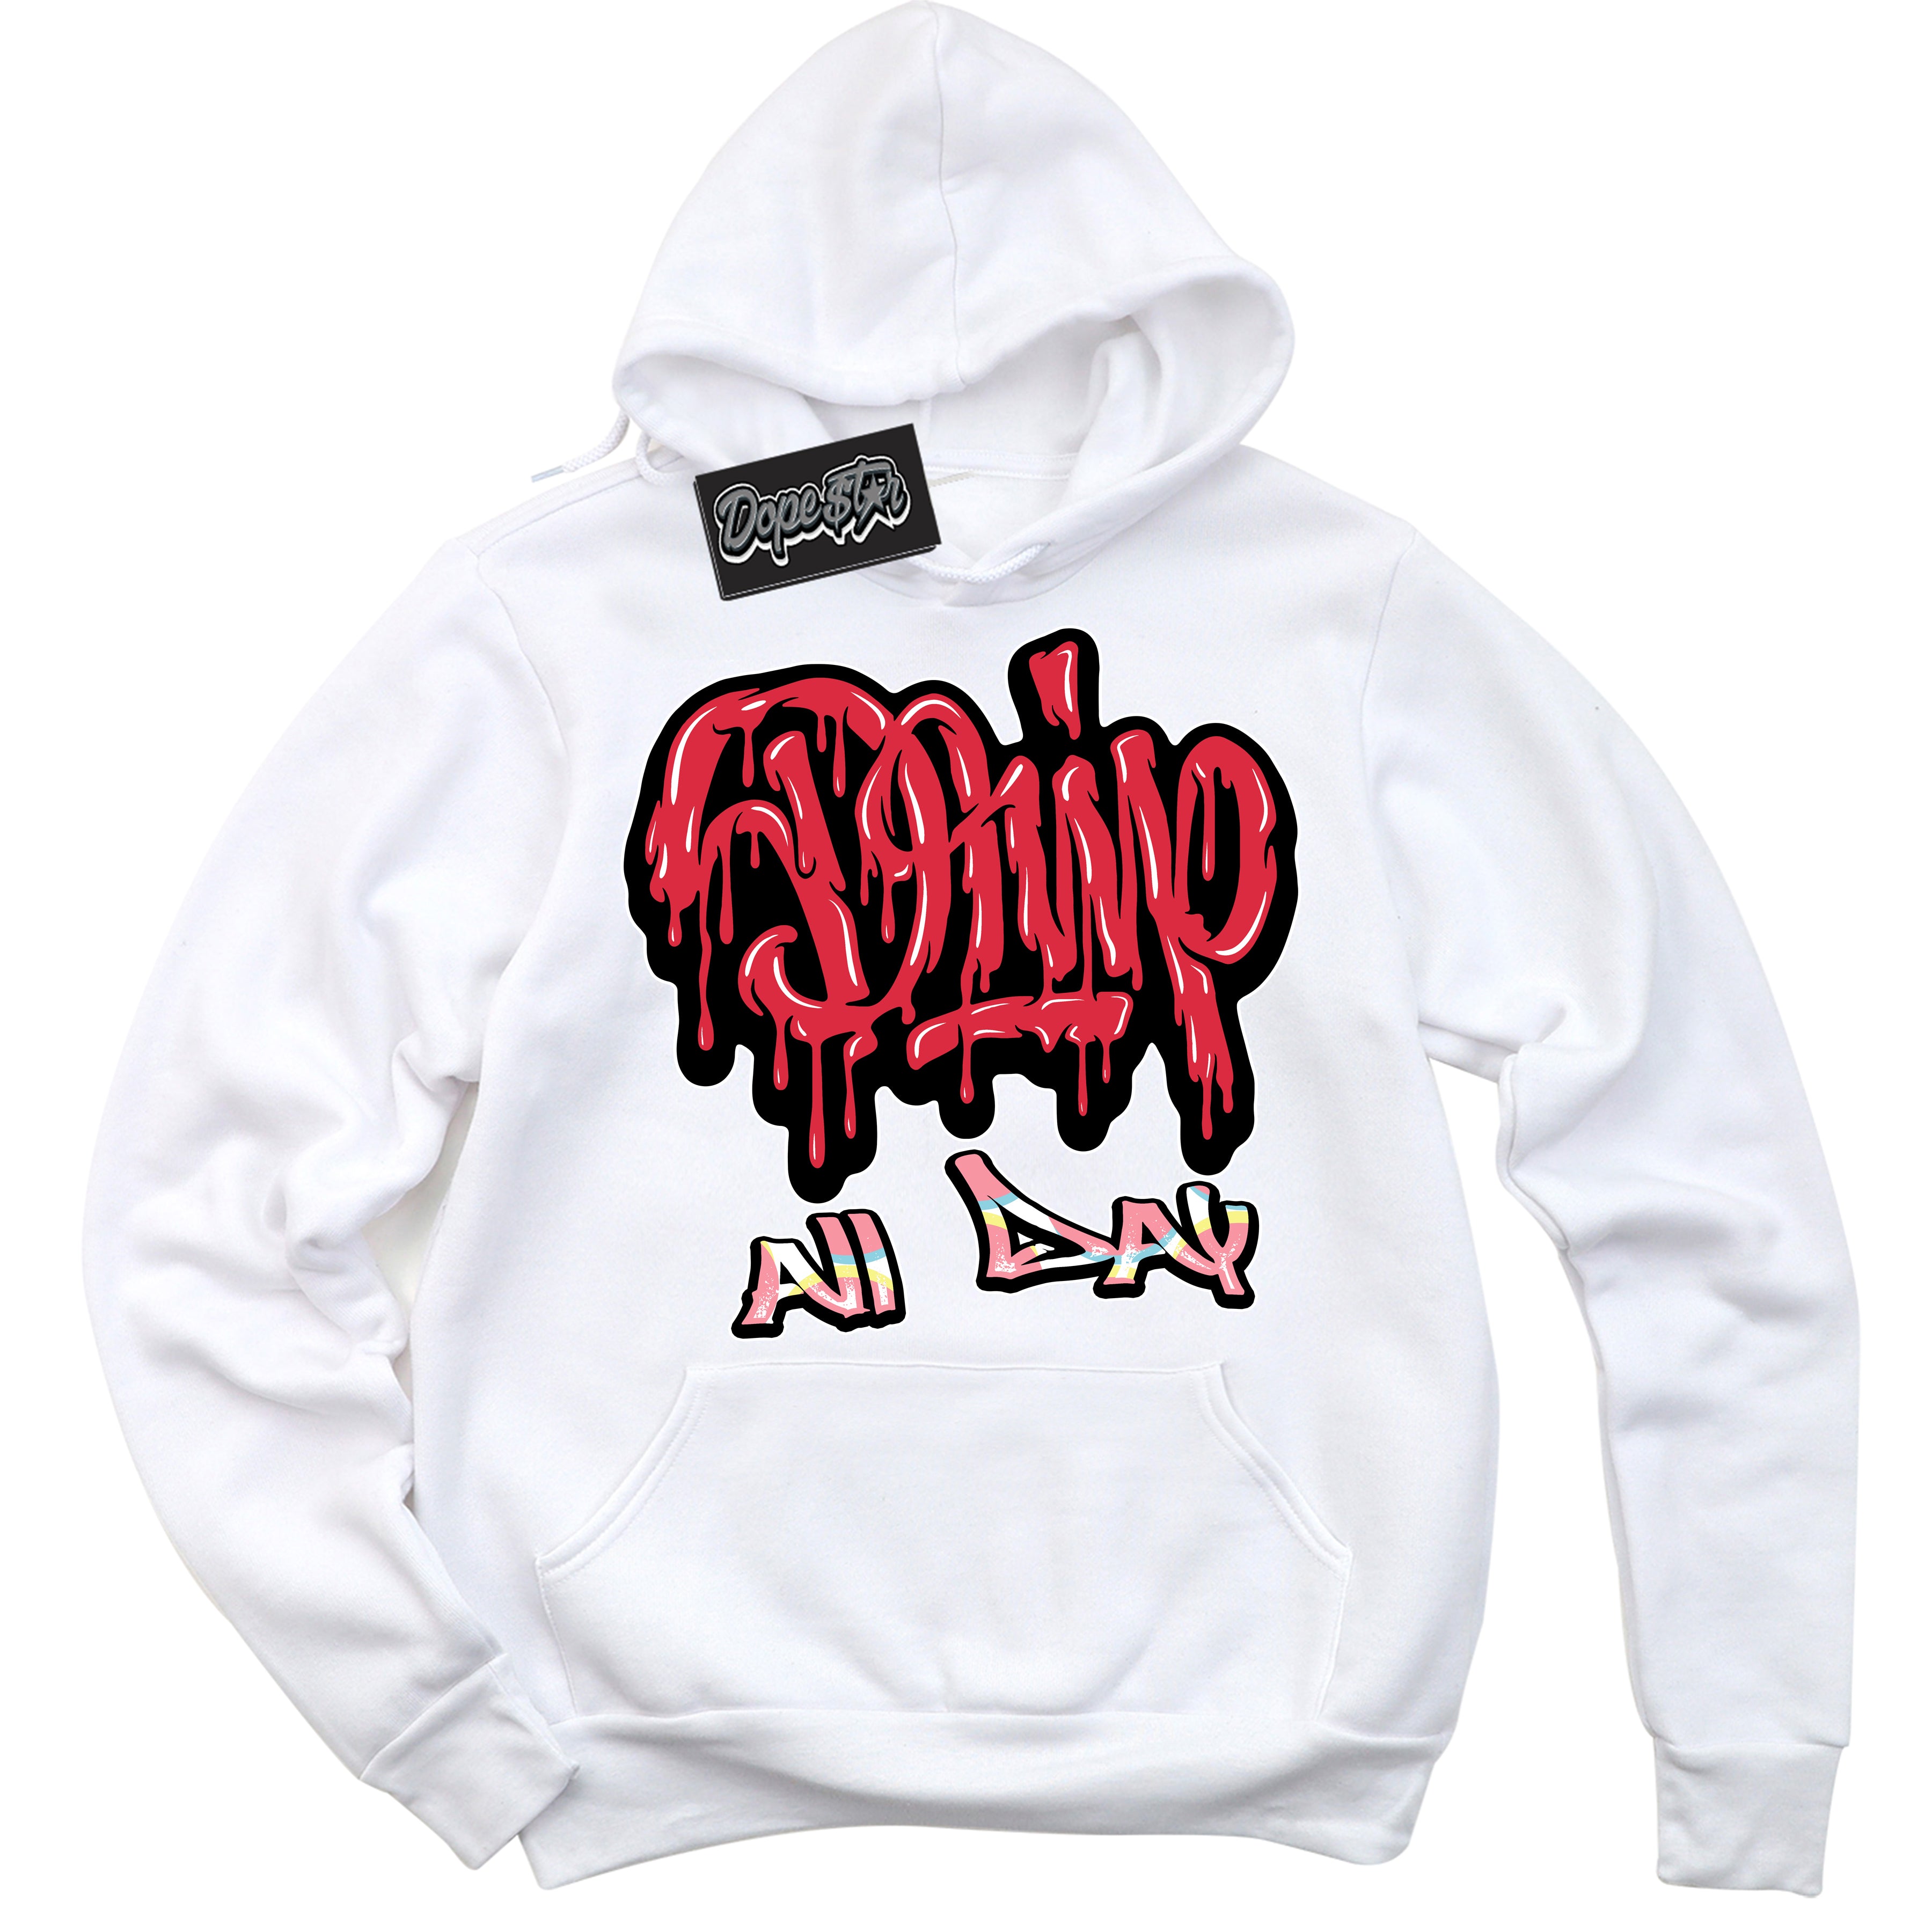 Cool White Graphic DopeStar Hoodie with “ Drip All Day “ print, that perfectly matches Spider-Verse 1s sneakers